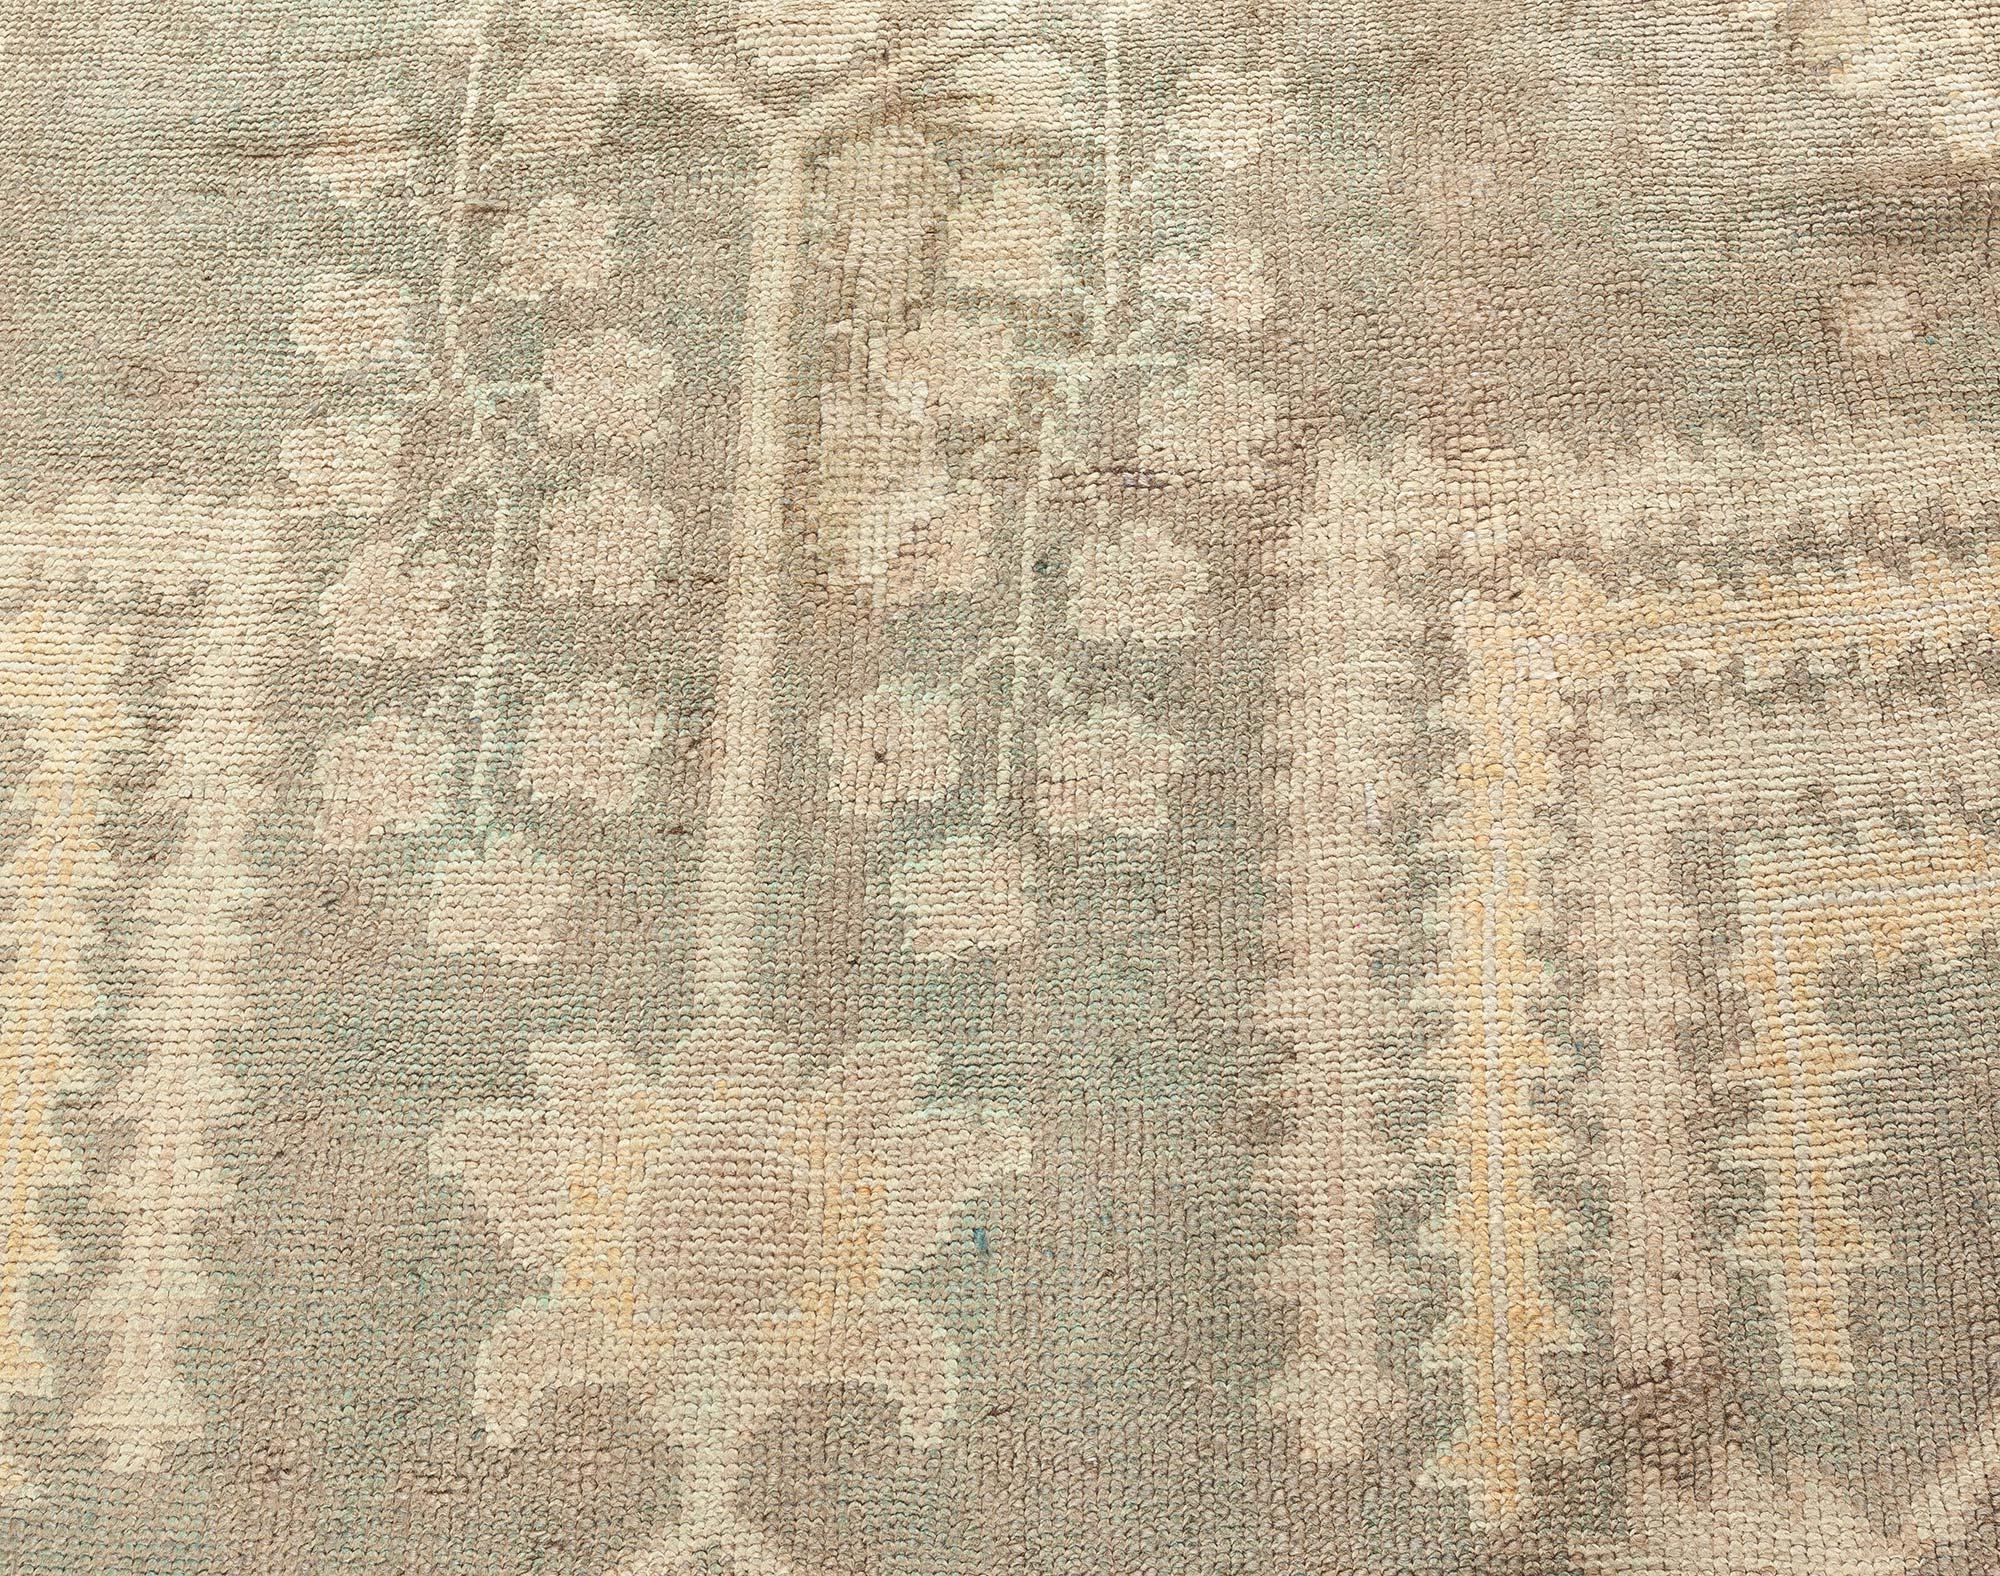 Dusty shades of yellow, beige, brown and taupe antique Turkish Oushak wool rug
Size: 14'0